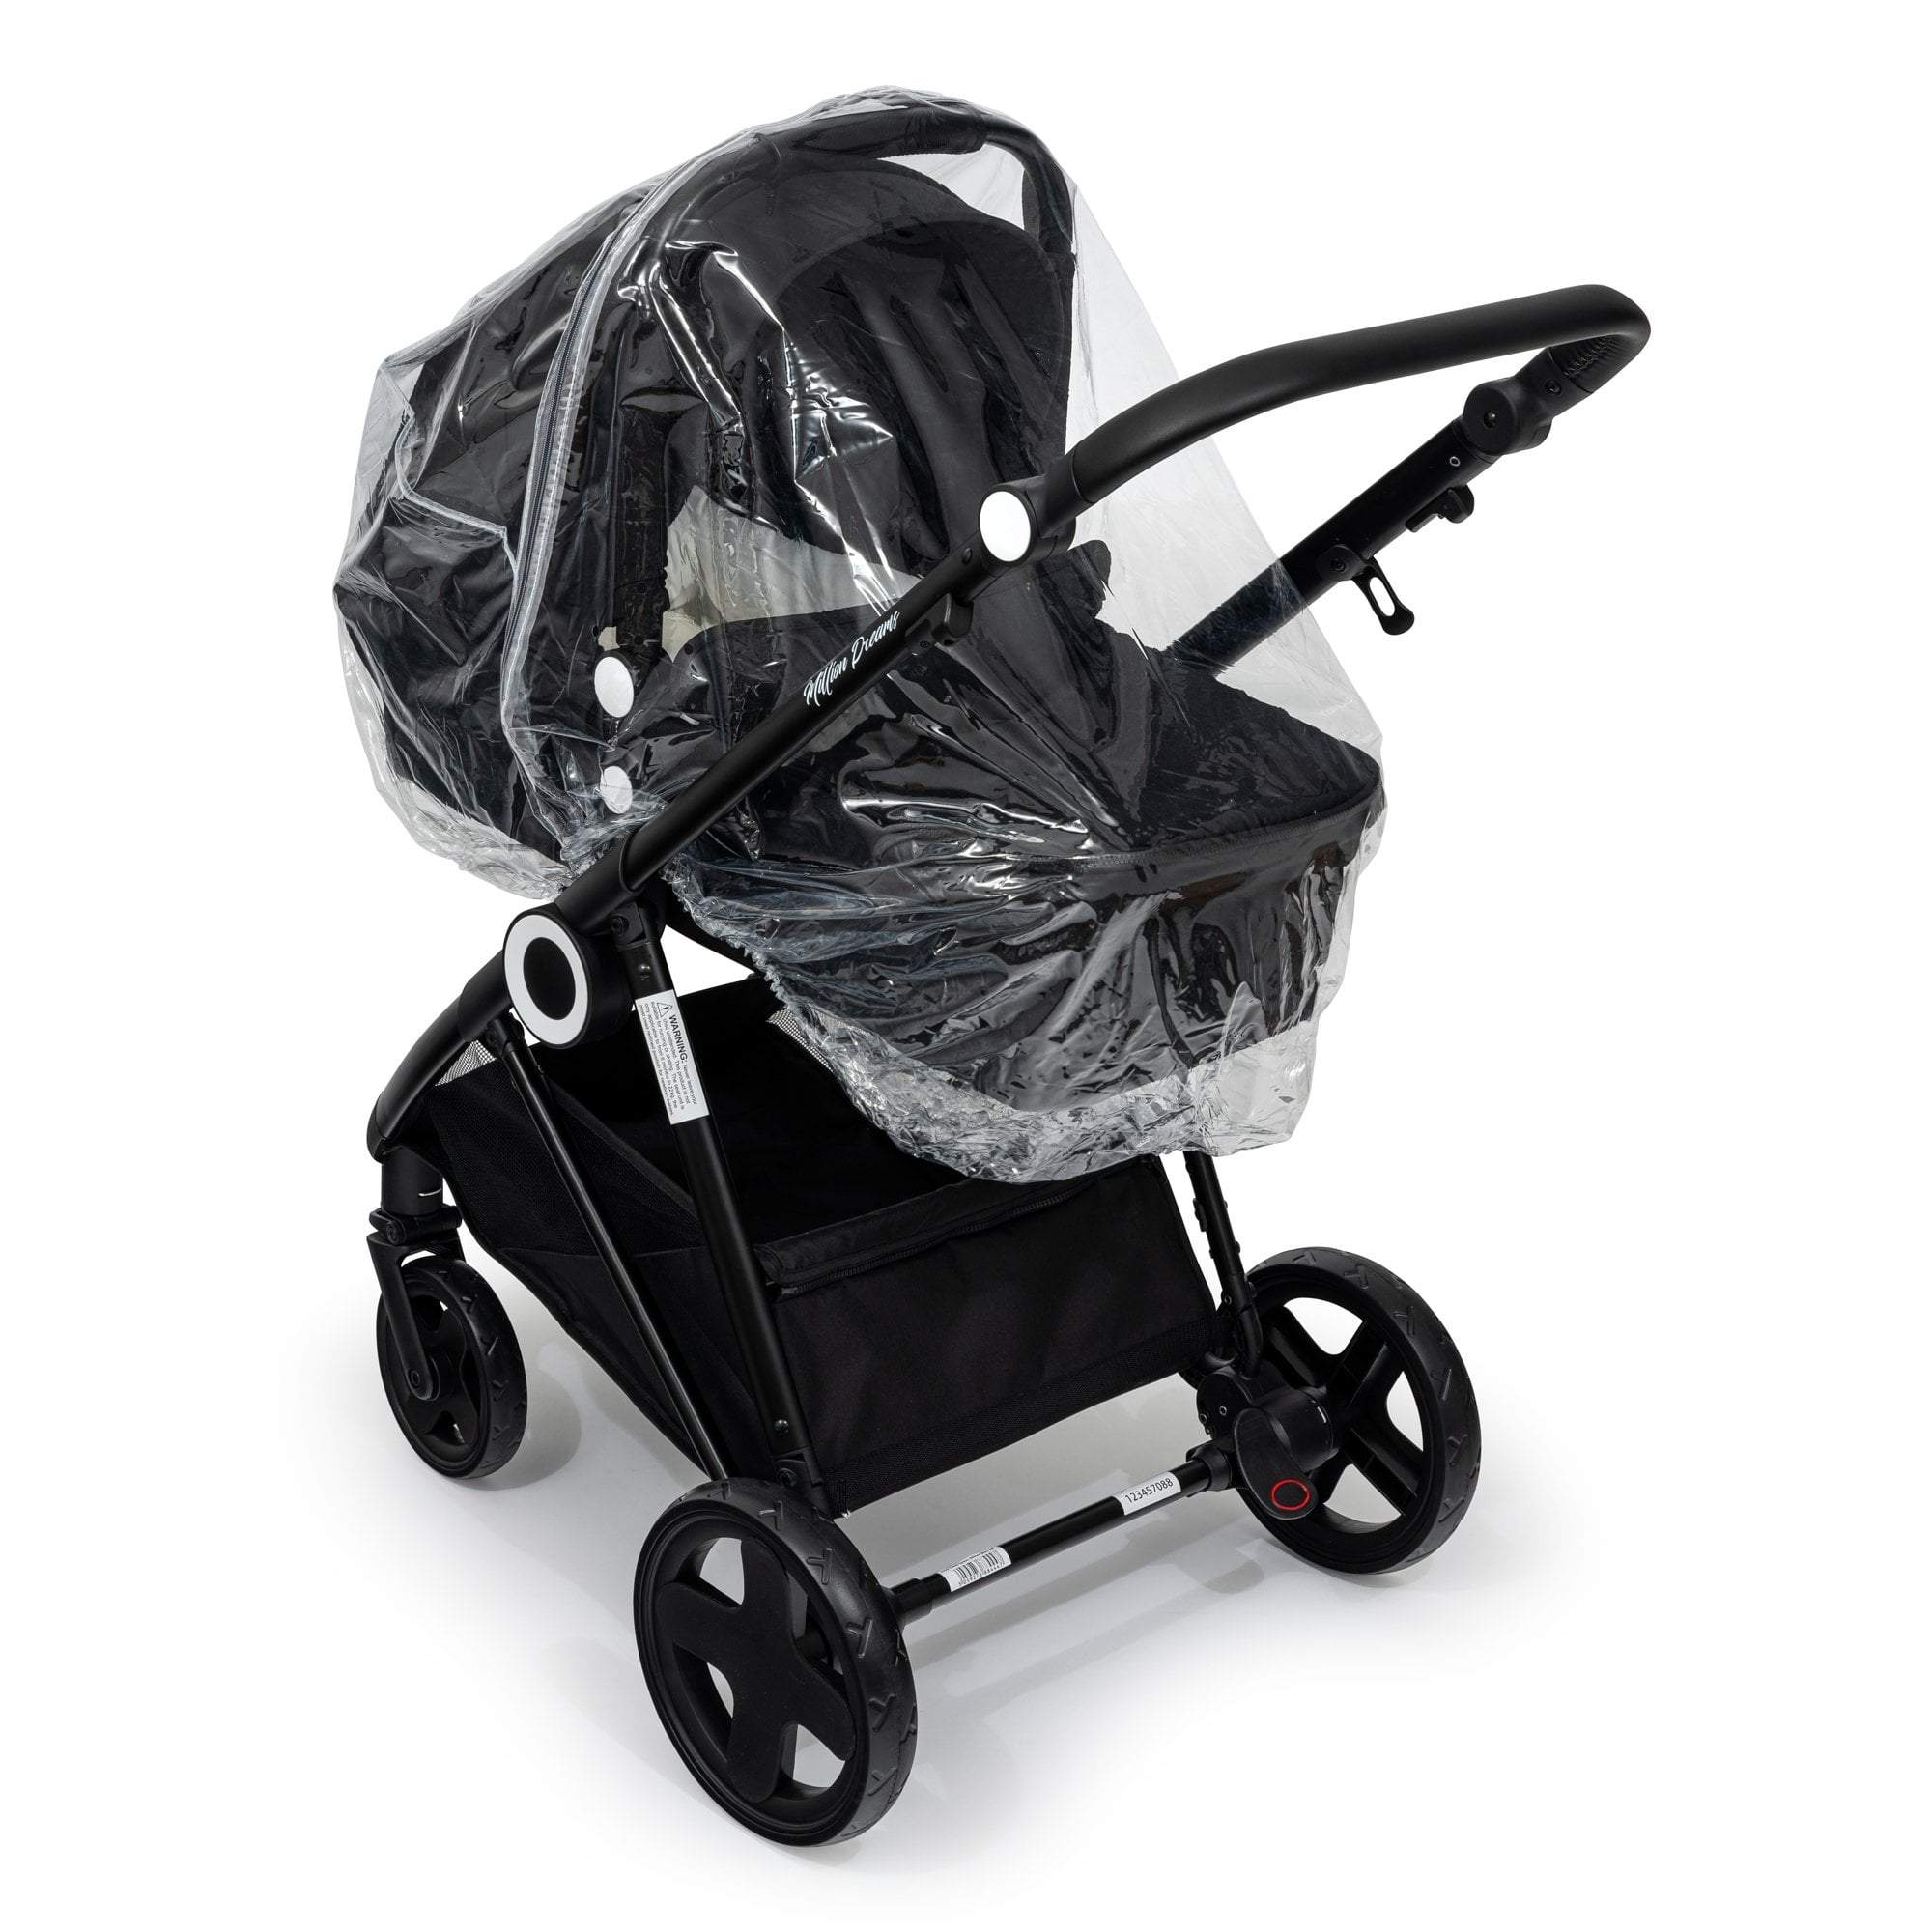 Carrycot Raincover Compatible With Red Kite - Fits All Models - For Your Little One